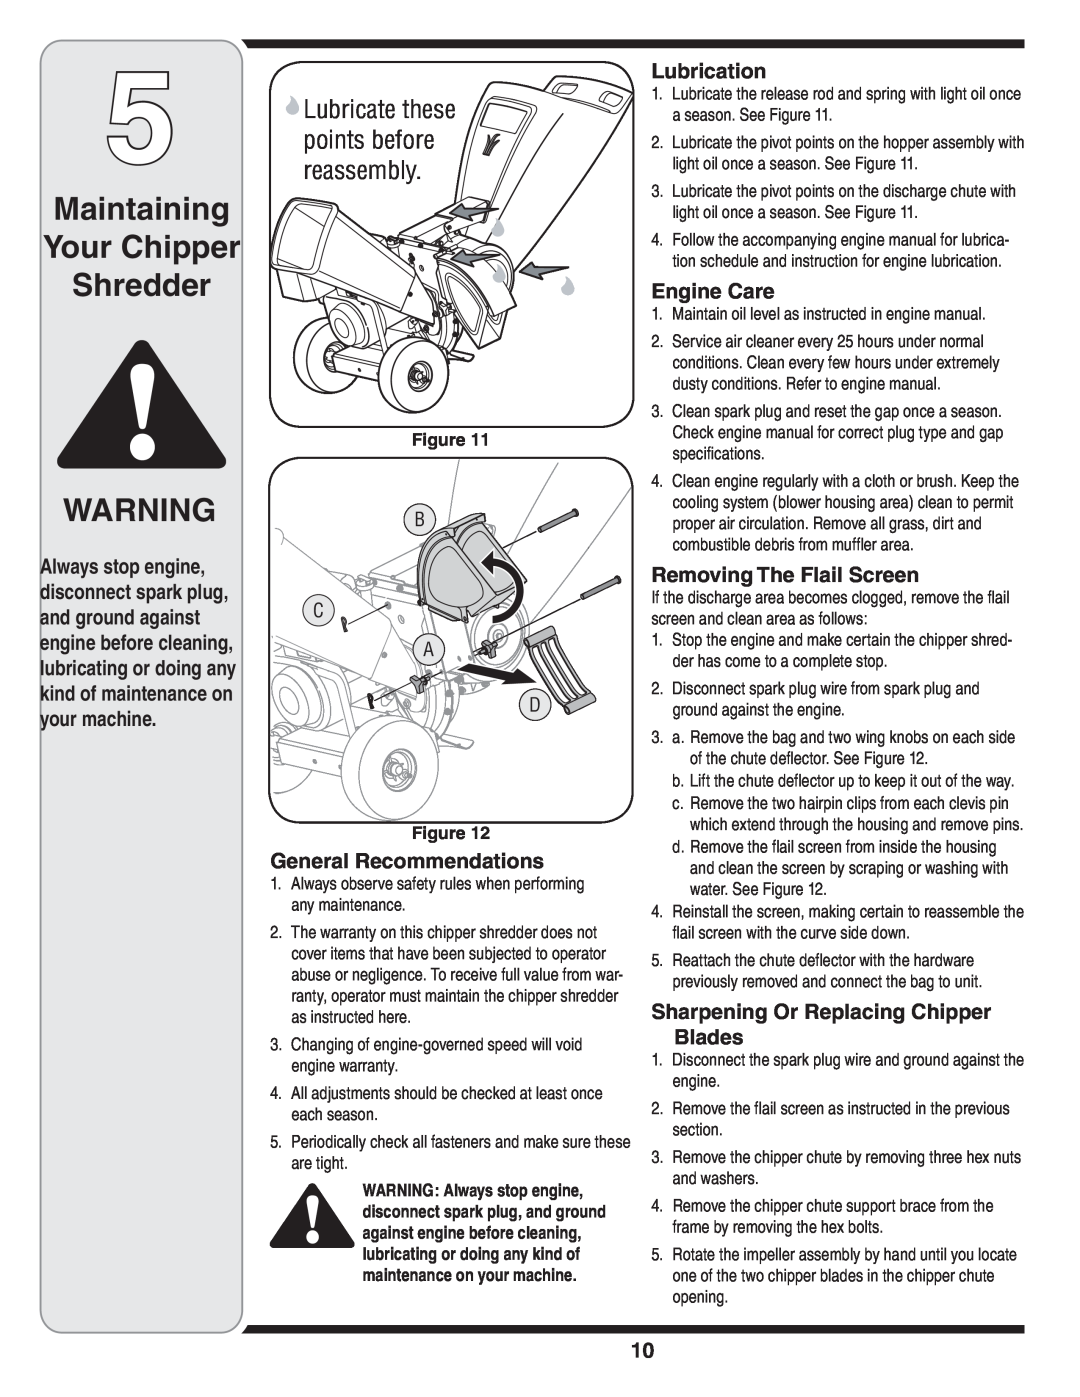 MTD 462 thru 464 warranty Maintaining Your Chipper Shredder, General Recommendations, Lubrication, Engine Care 